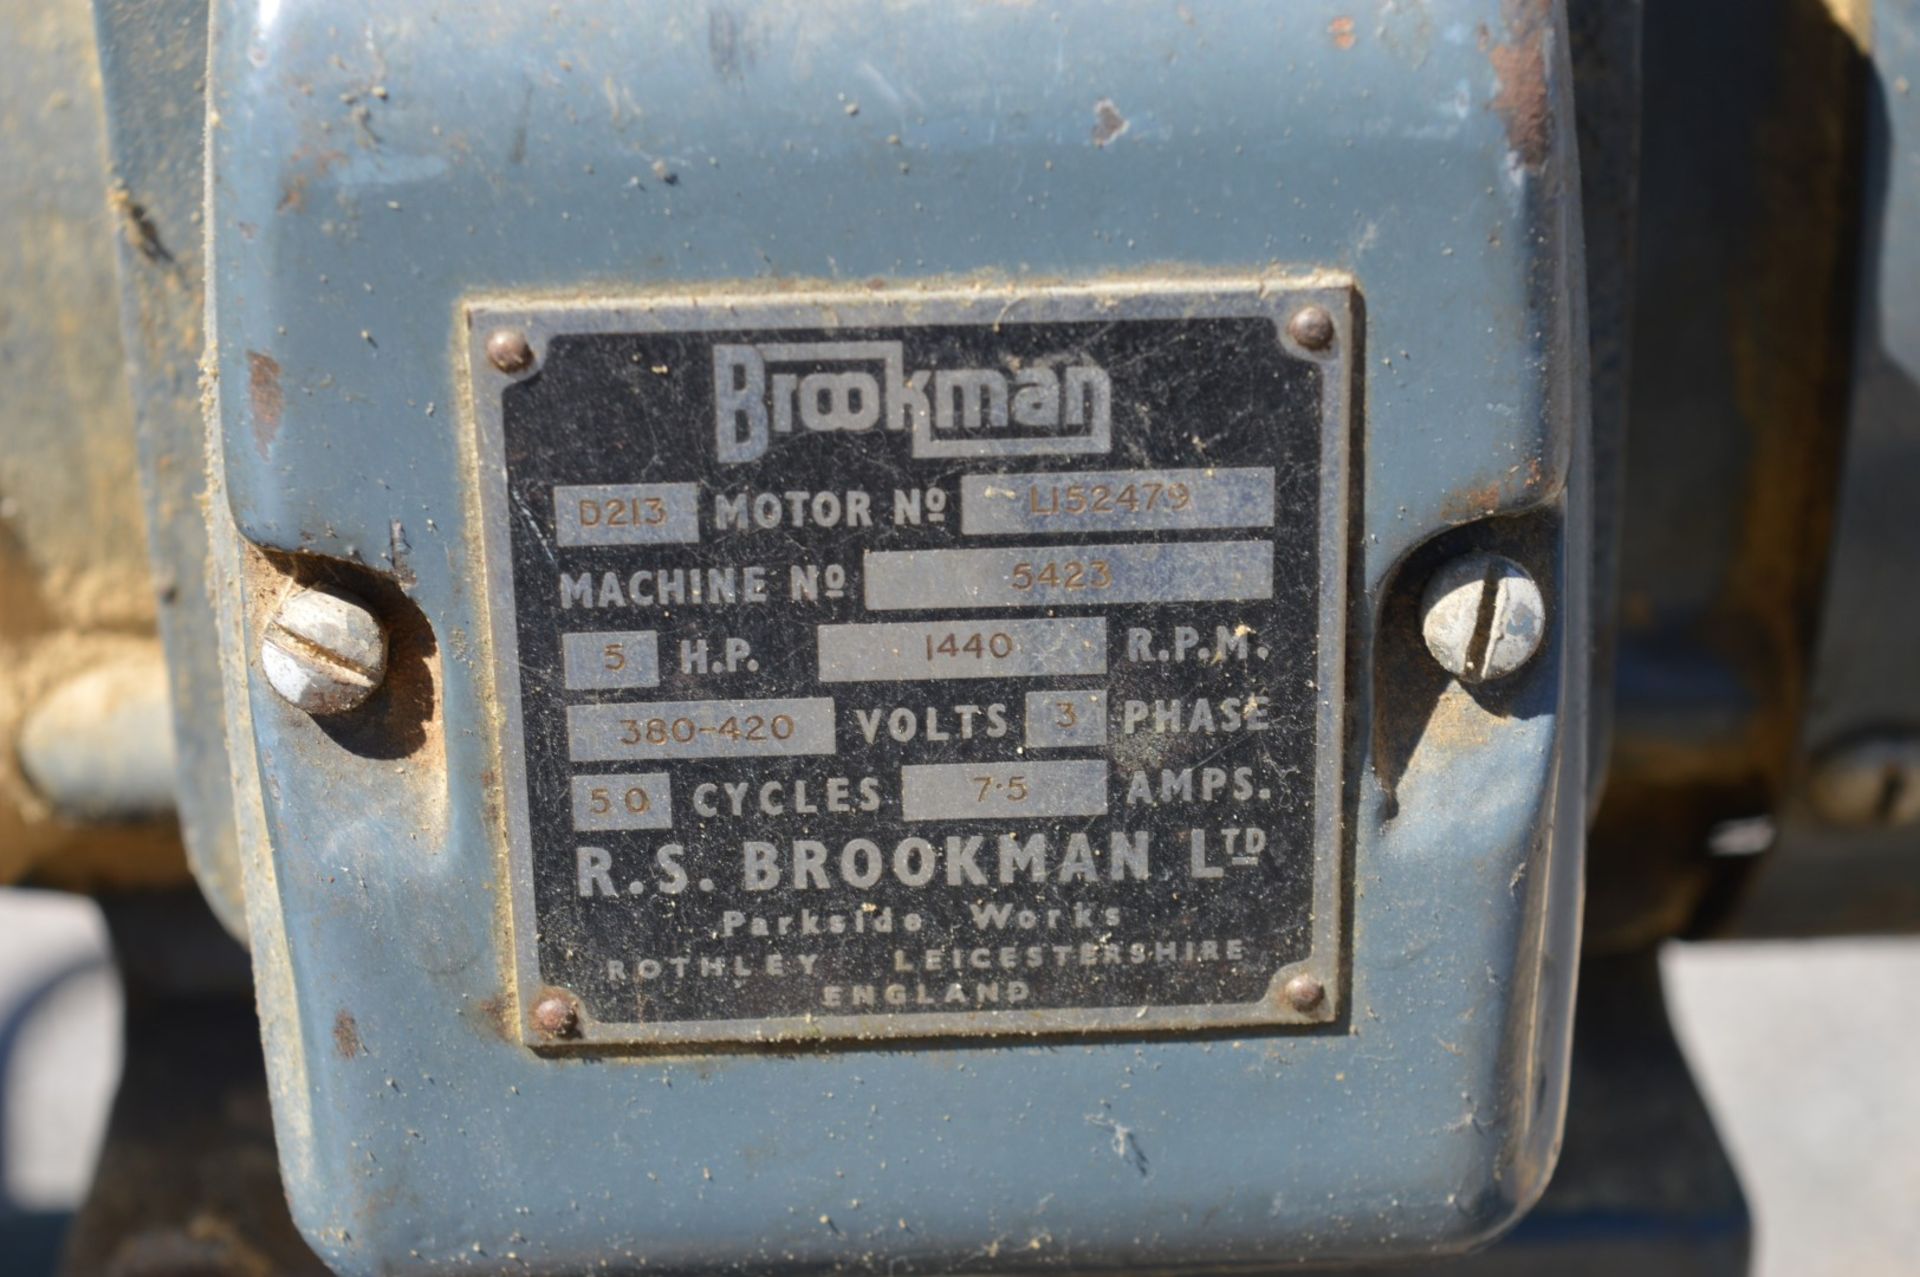 1 x Brookman Dovetailing Machine - Type ADM-1 - Serial No 5423 - 3 Phase - Dimensions H110 x W180 - Image 4 of 12